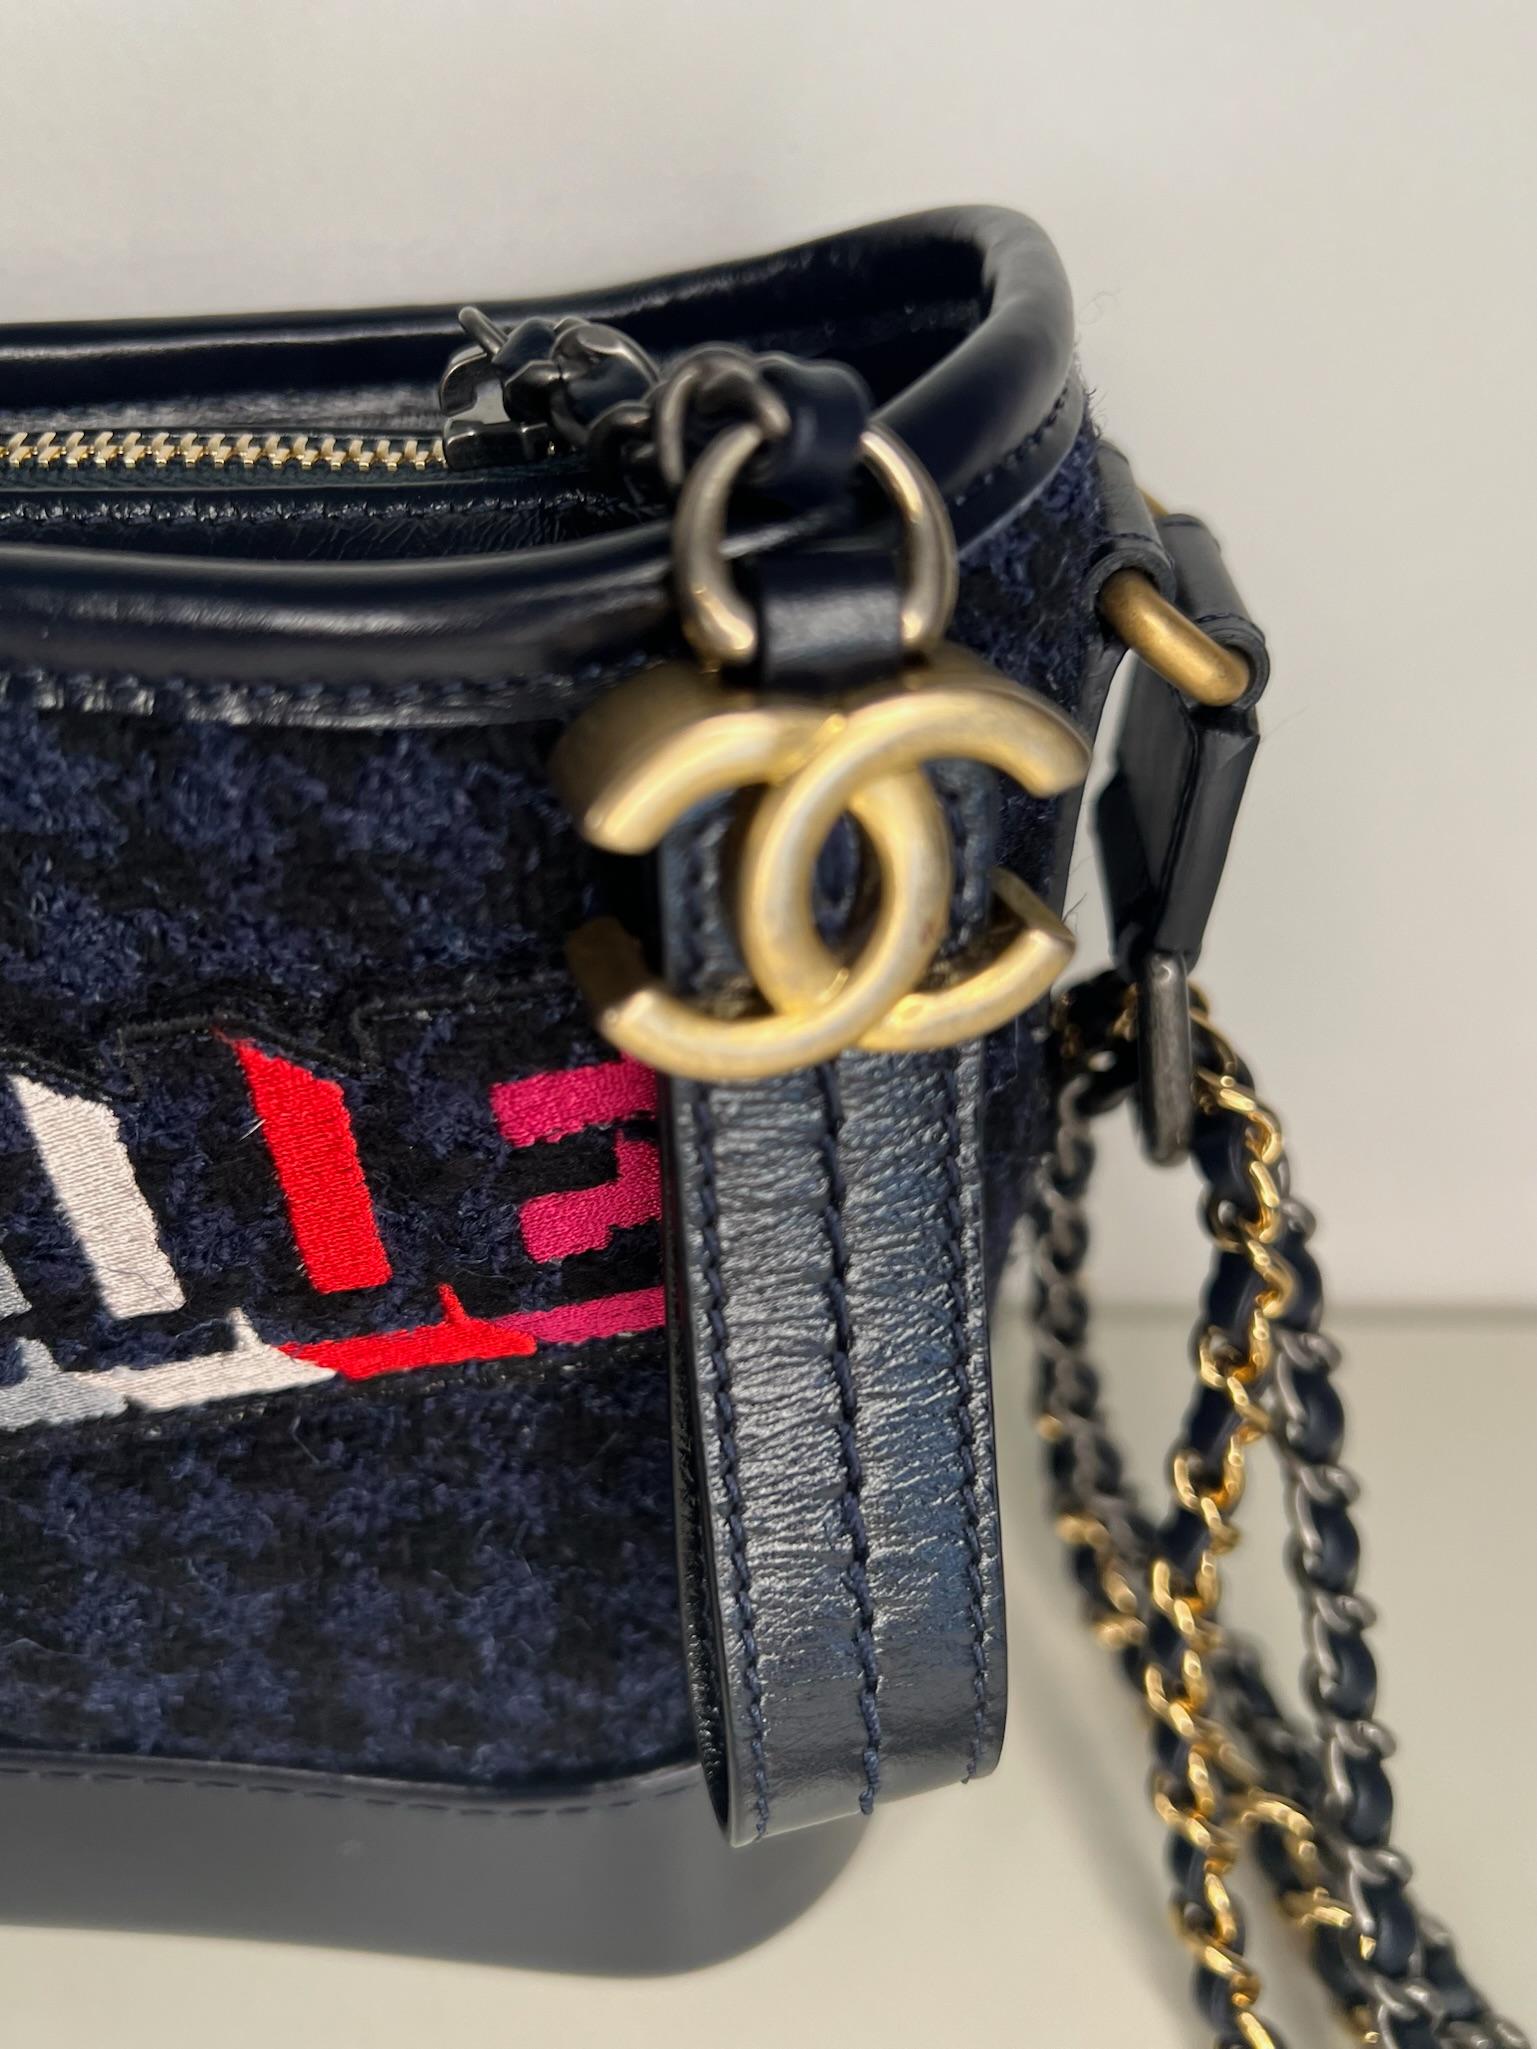 This super chic Gabrielle Hobo bag from Chanel's 2017 Fall Collection features a navy tweed and leather outer with multi-colour 'Gabrielle' motif on tweed. The bag also features multi-tonal antique-tone hardware and cranberry grosgrain lining. In